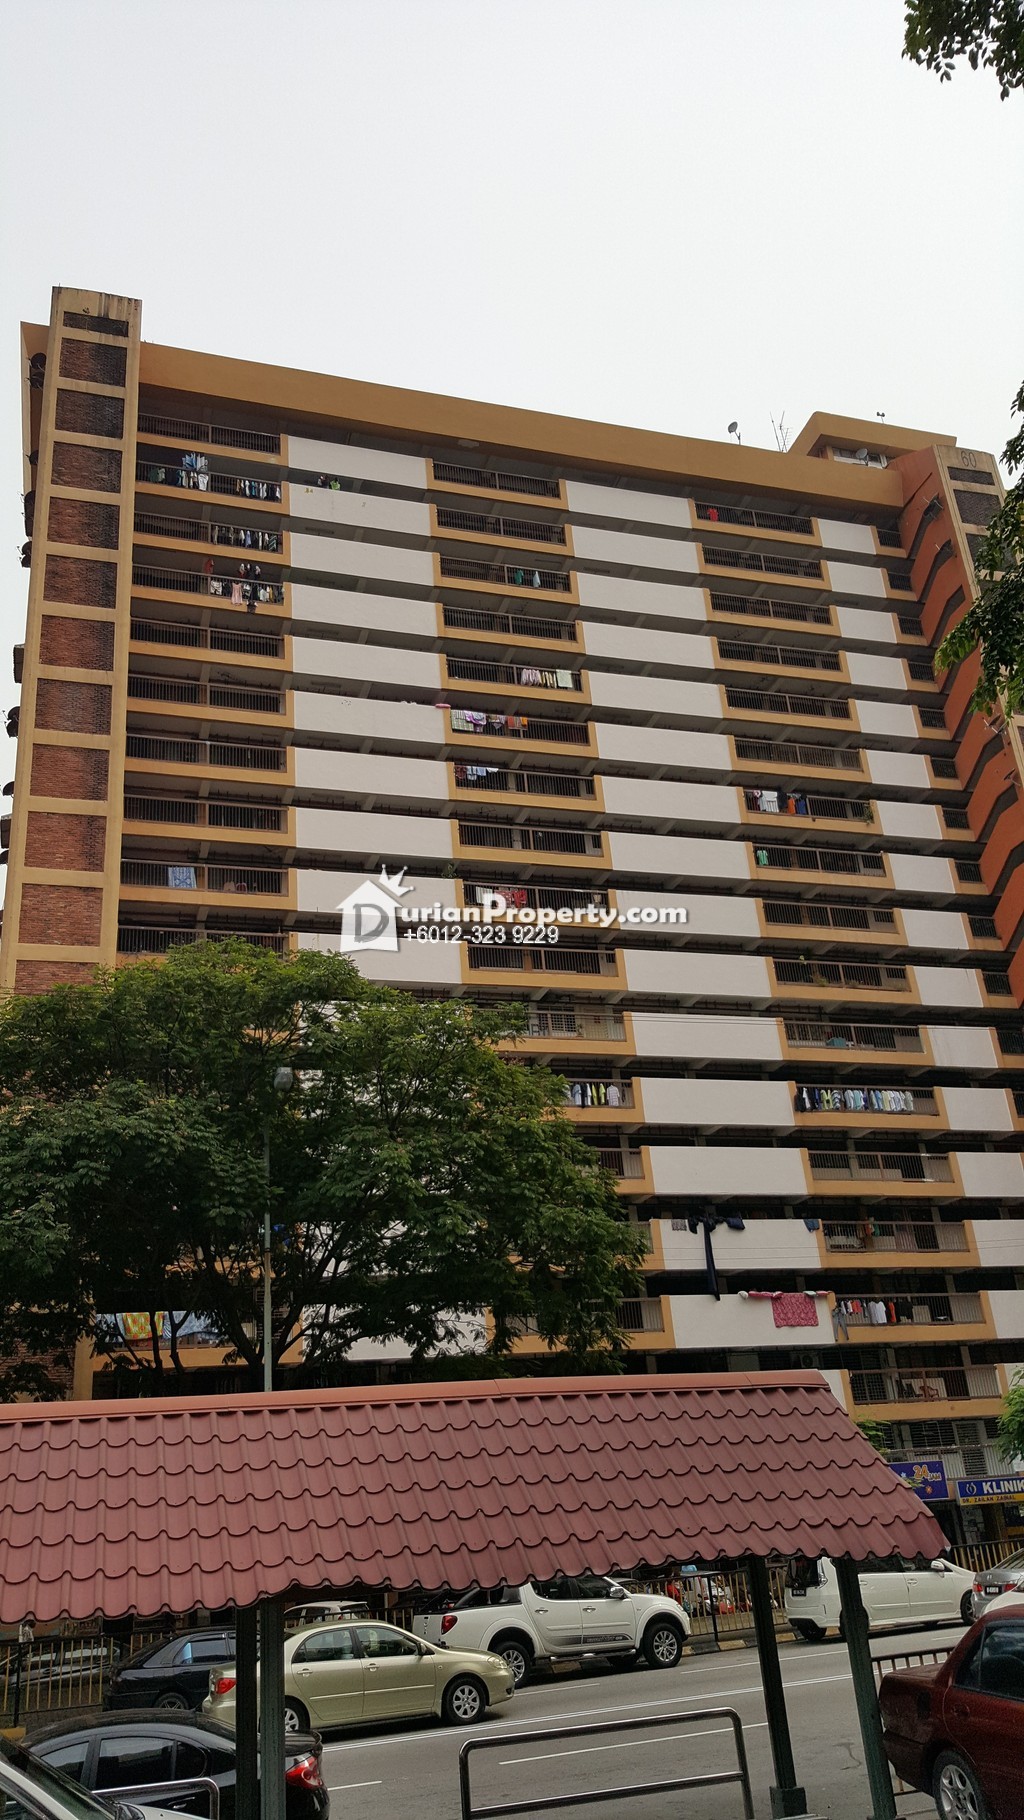 Flat For Rent At Sri Sabah Apartment Cheras For Rm 750 By Marcus Lee Durianproperty